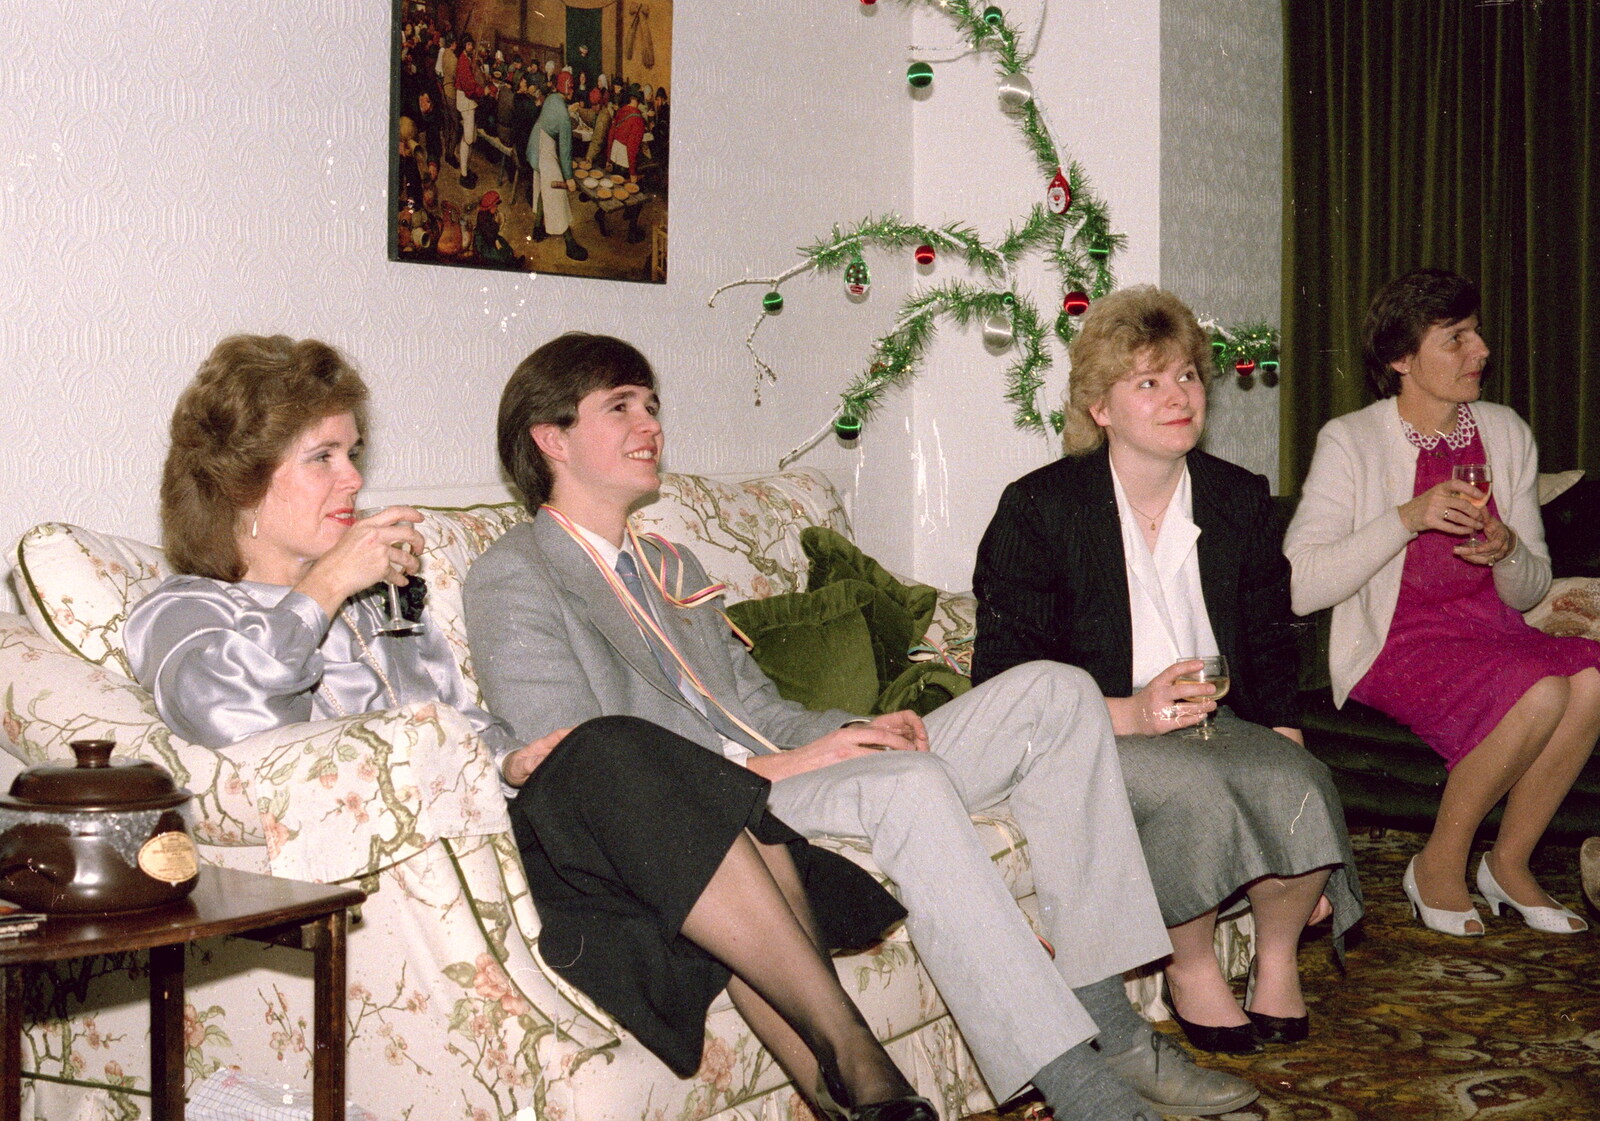 Bernice and Phil, with Anna and Liz's mother from New Year's Eve at Anna's, Walkford, Dorset - 31st December 1985